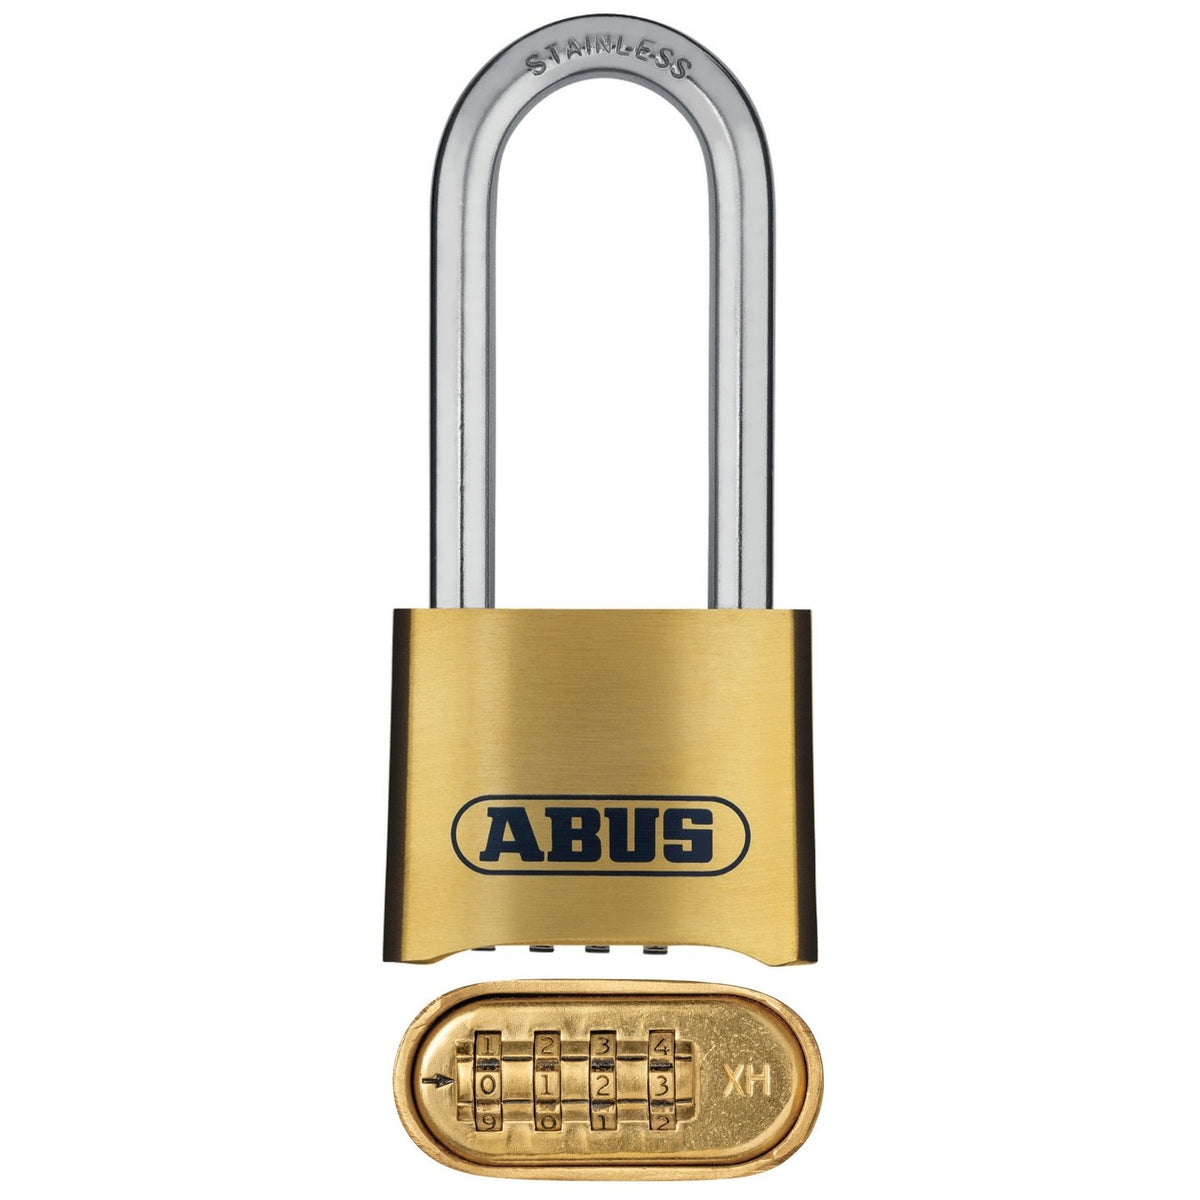 Abus 180IB/50HB63 Lock Resettable Brass Combination Padlock with 2-Inch Shackle - The Lock Source